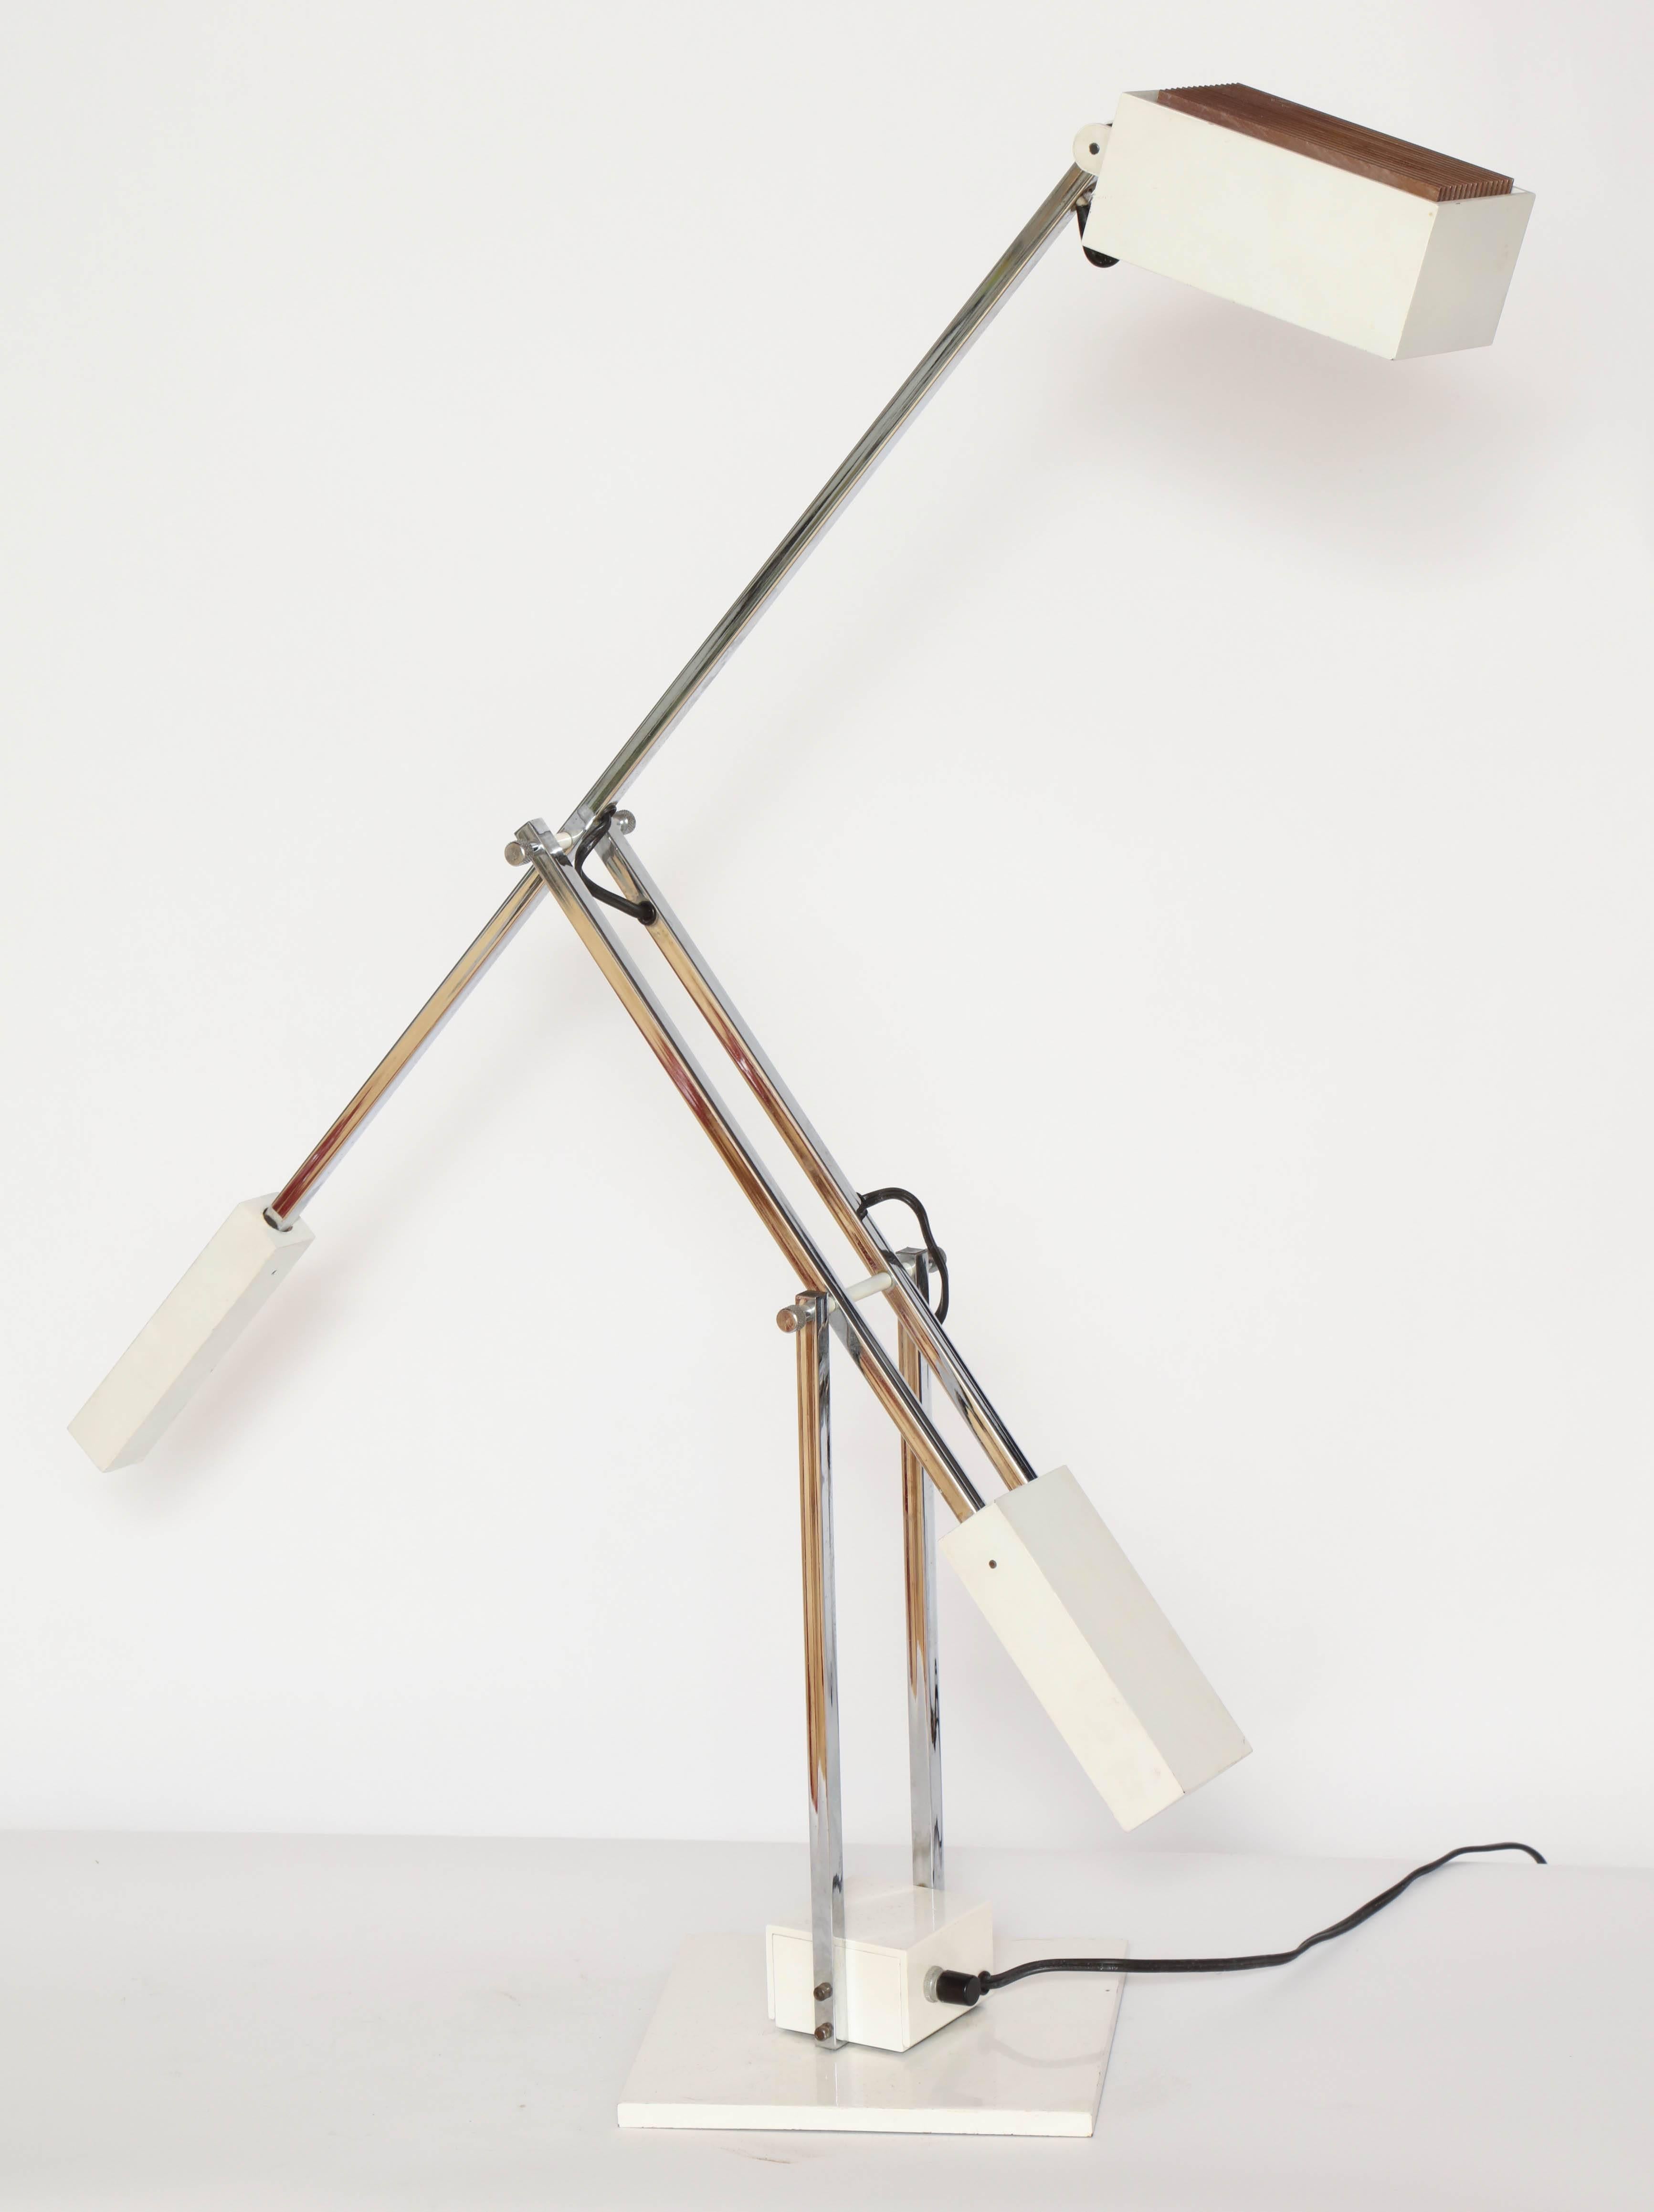 Robert Sonneman articulated table lamp, circa 1960s.
Shade and height adjust